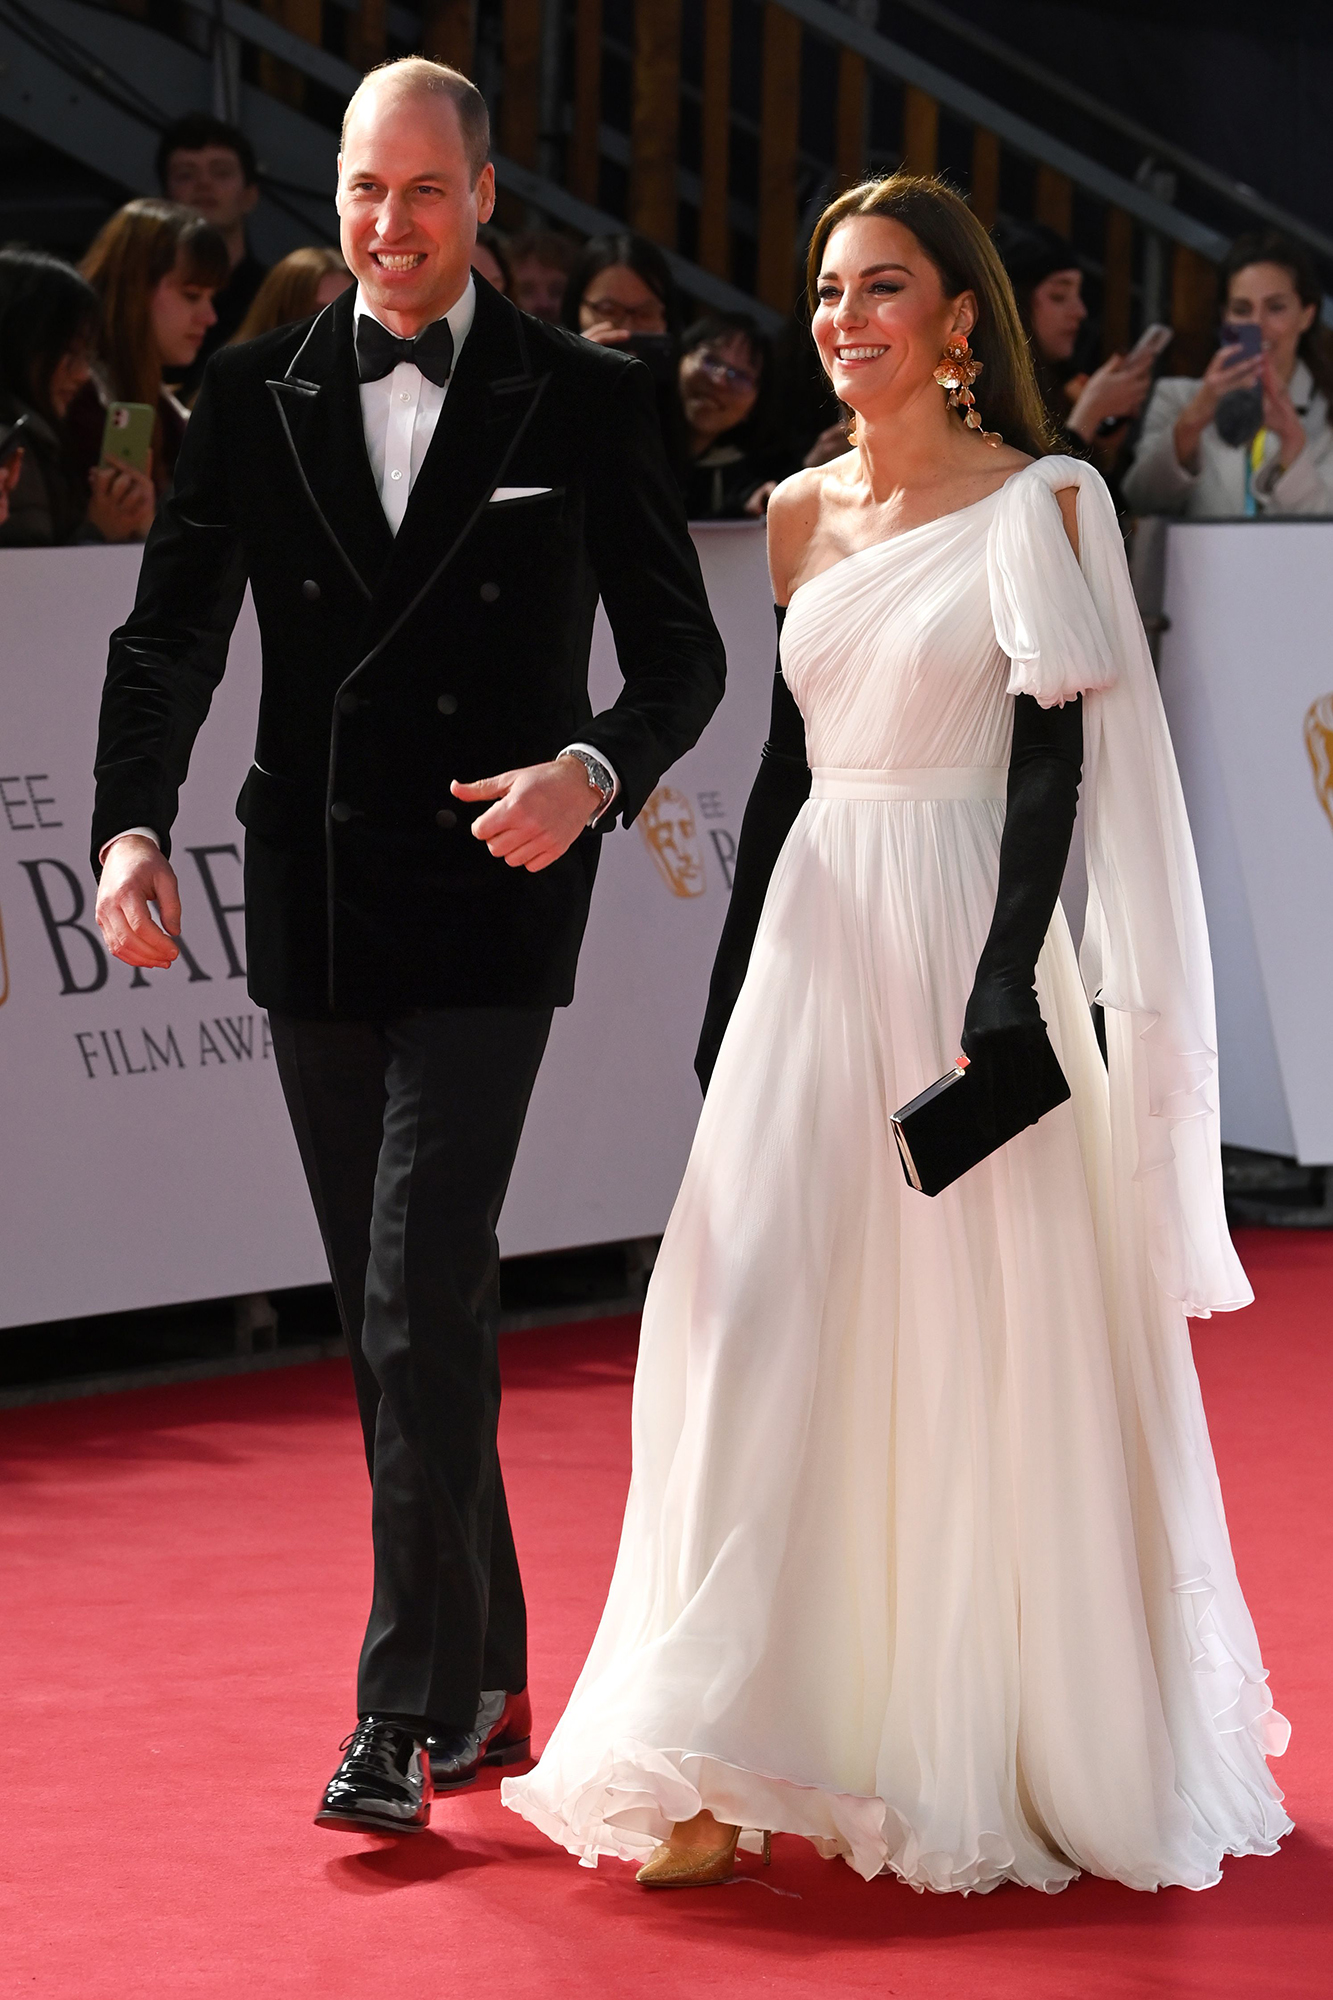 Kate Middleton stuns with dramatic white dress and black gloves at BAFTAs  ceremony - Irish Mirror Online